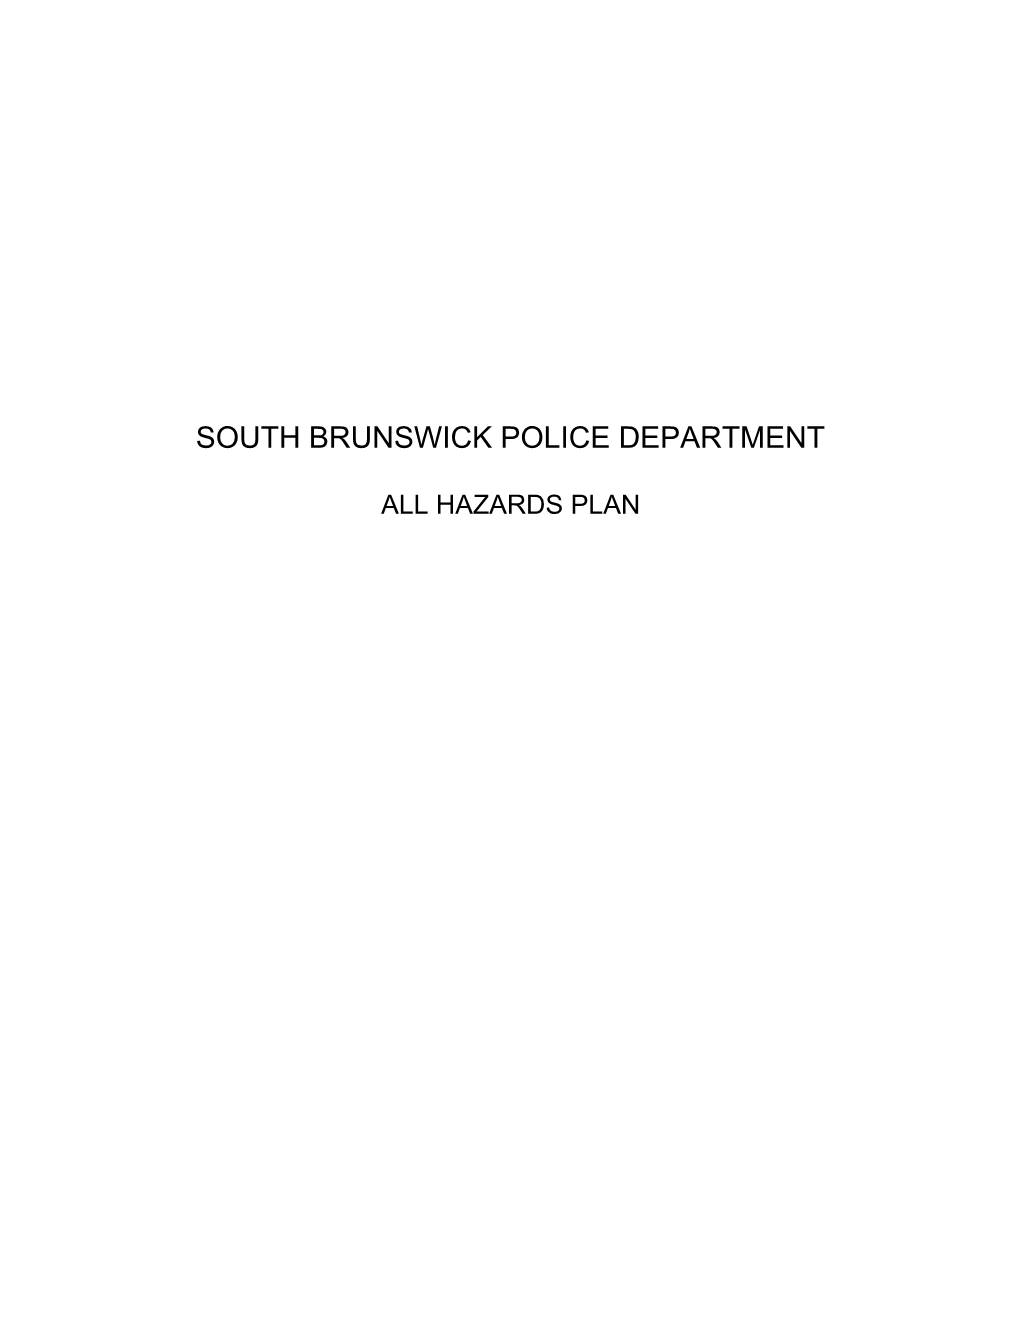 It Shall Be the Policy of the South Brunswick Police Department to Implement and Follow